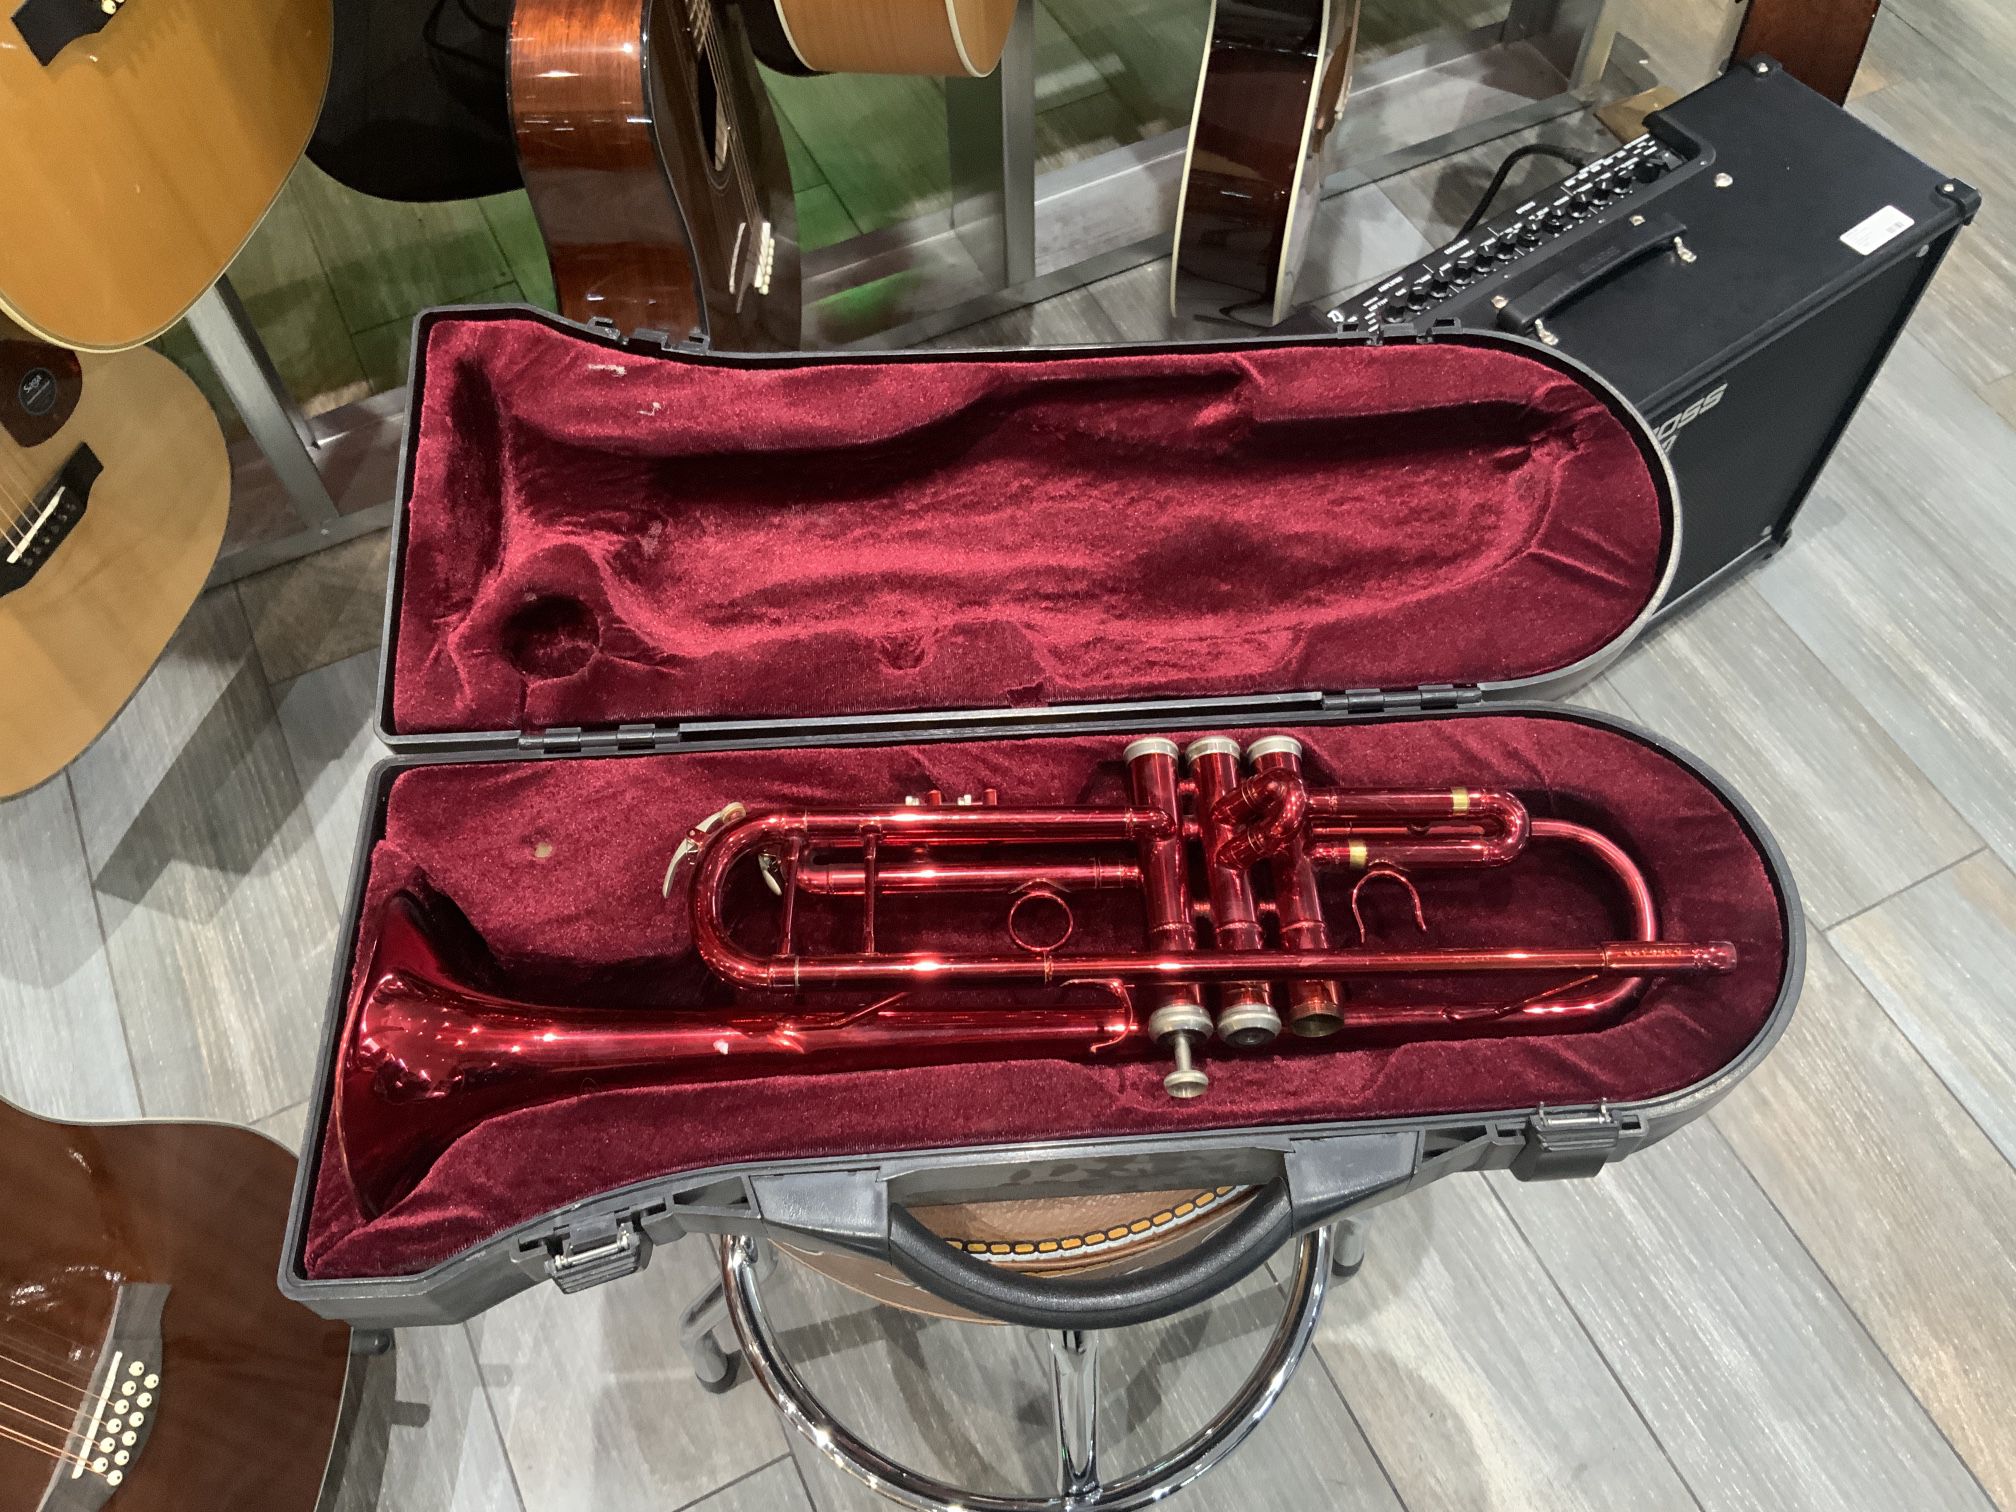 Red Avalon Trumpet For Parts/Repair